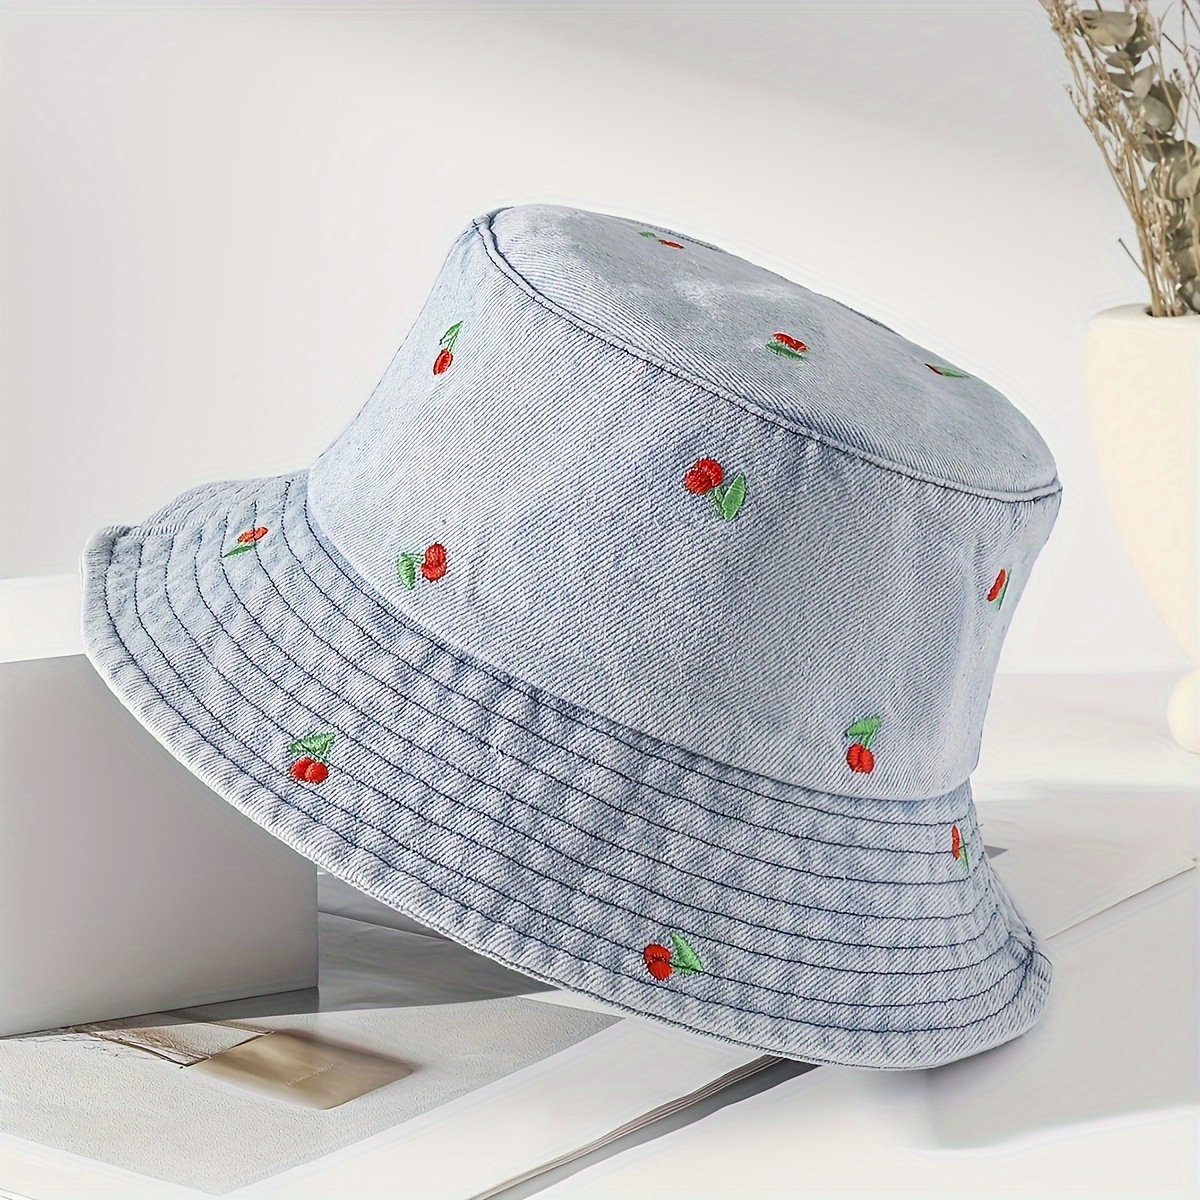 

Cherry Embroidered Bucket Hat For Women, Casual Washed Look, Sunshade Basin Cap, Lightweight Adjustable Fisherman's Hat For Girls